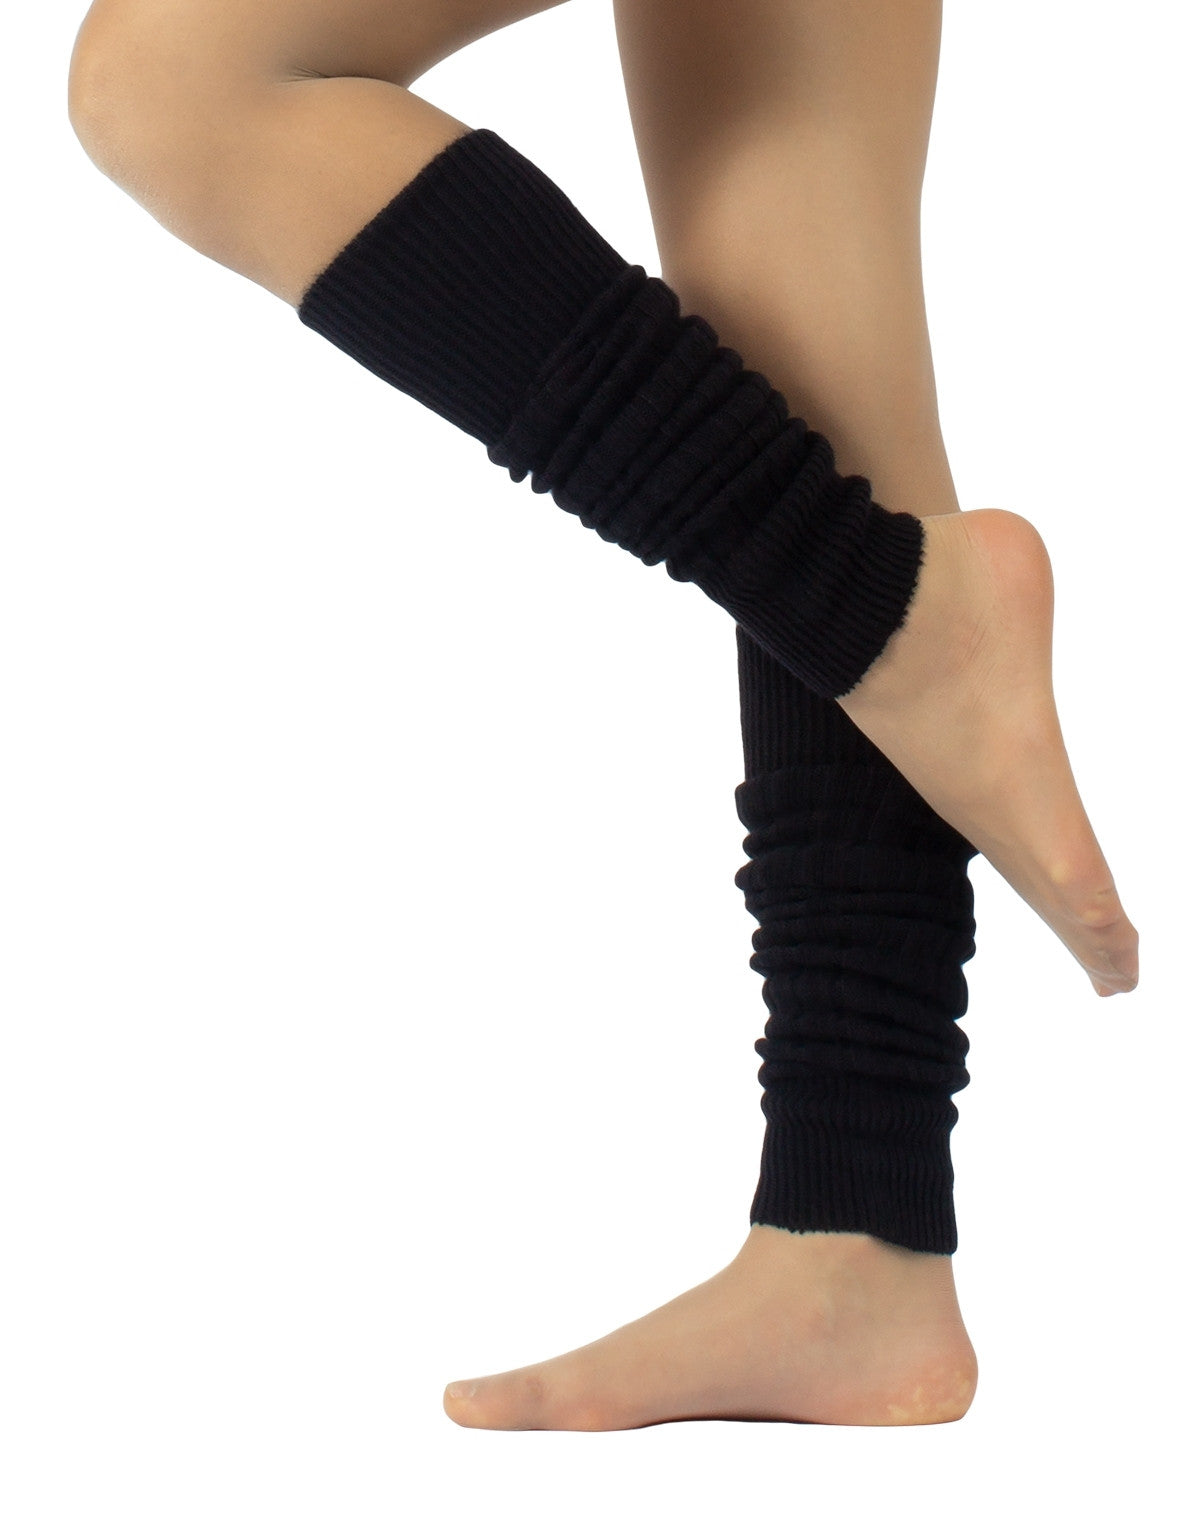 Calzitaly Angora Touch Leg Warmer - Super soft black ribbed knitted legwarmers with elasticated cuffs, can be worn over the knee or scrunched down.